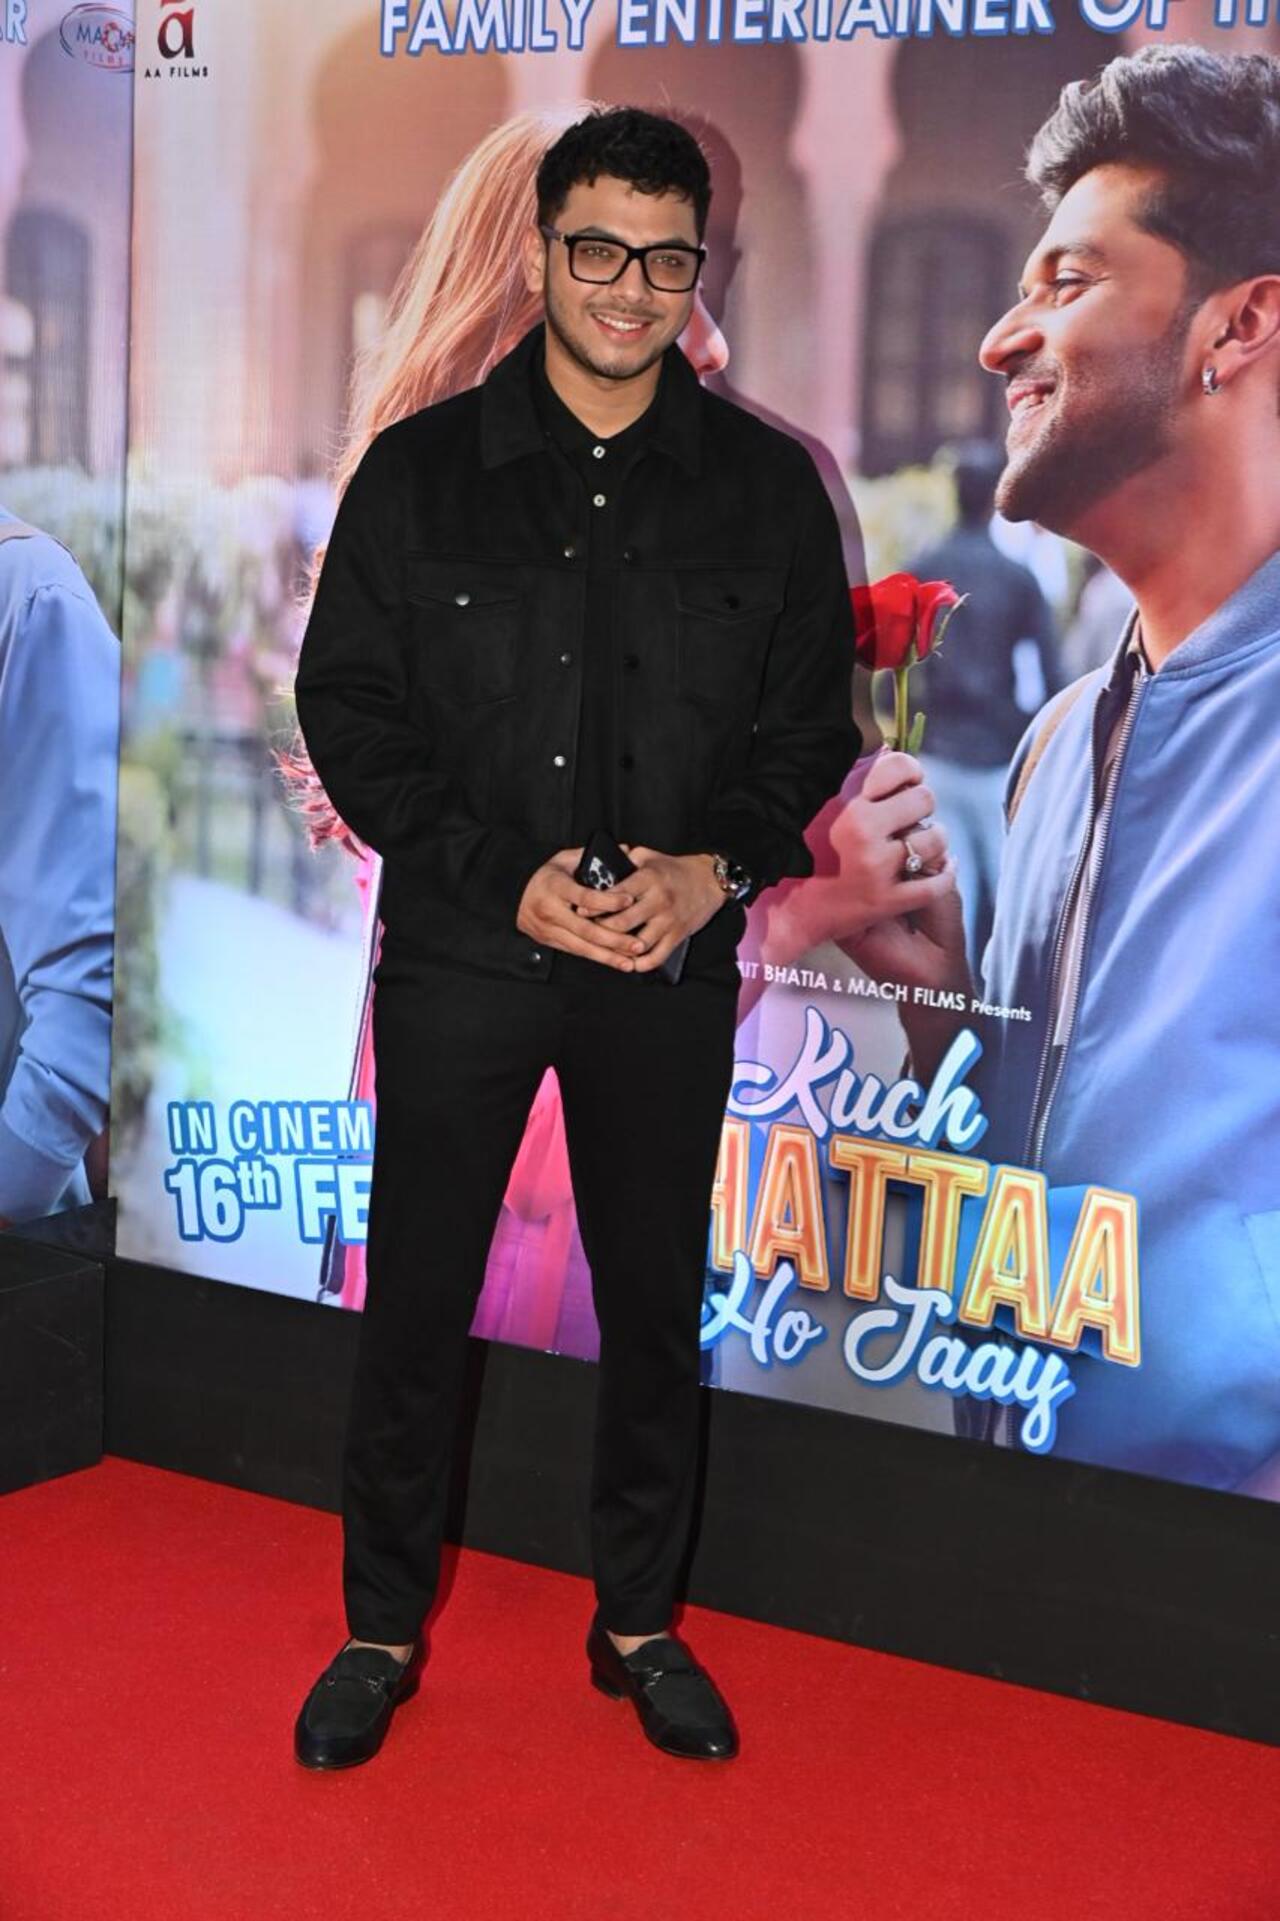 Vishal Jethwa was all smiles as he attended the screening dressed in an all-black outfit